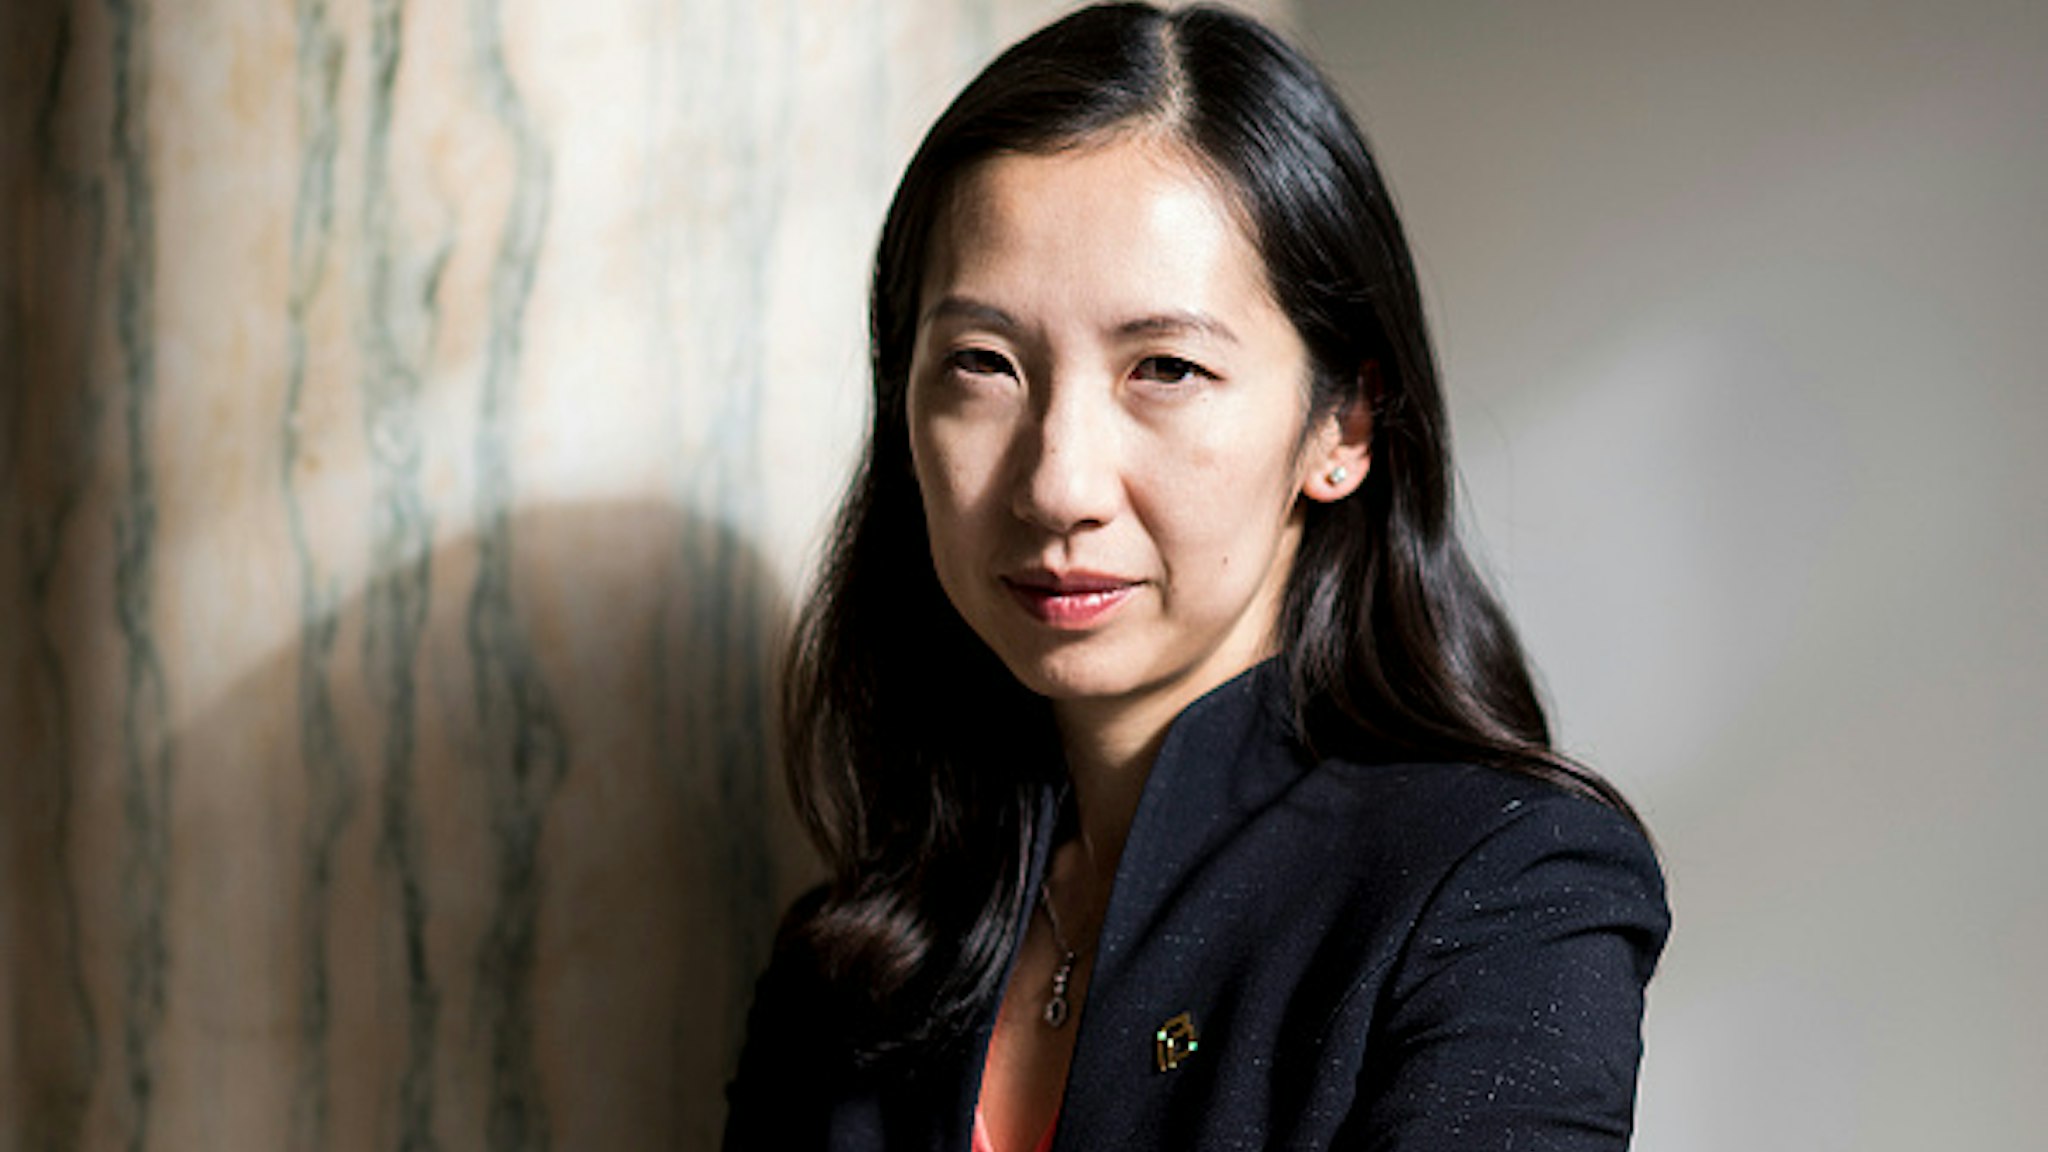 UNITED STATES - JANUARY 8: Dr. Leana Wen is the new President of the Planned Parenthood Federation of America and the Planned Parenthood Action Fund.